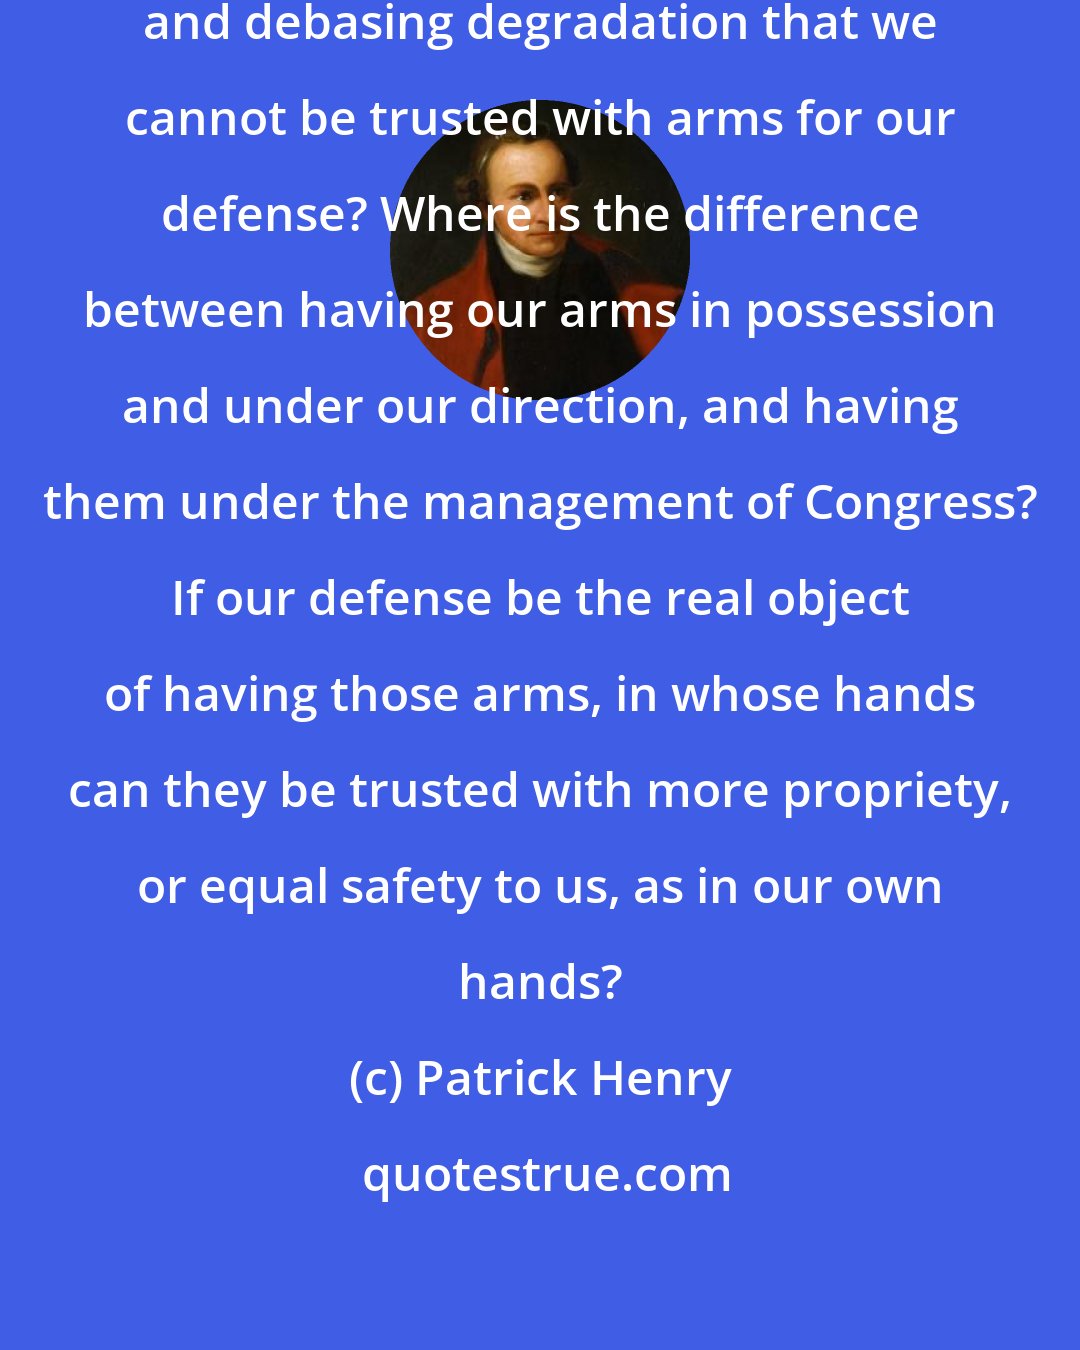 Patrick Henry: Are we at last brought to such humiliating and debasing degradation that we cannot be trusted with arms for our defense? Where is the difference between having our arms in possession and under our direction, and having them under the management of Congress? If our defense be the real object of having those arms, in whose hands can they be trusted with more propriety, or equal safety to us, as in our own hands?